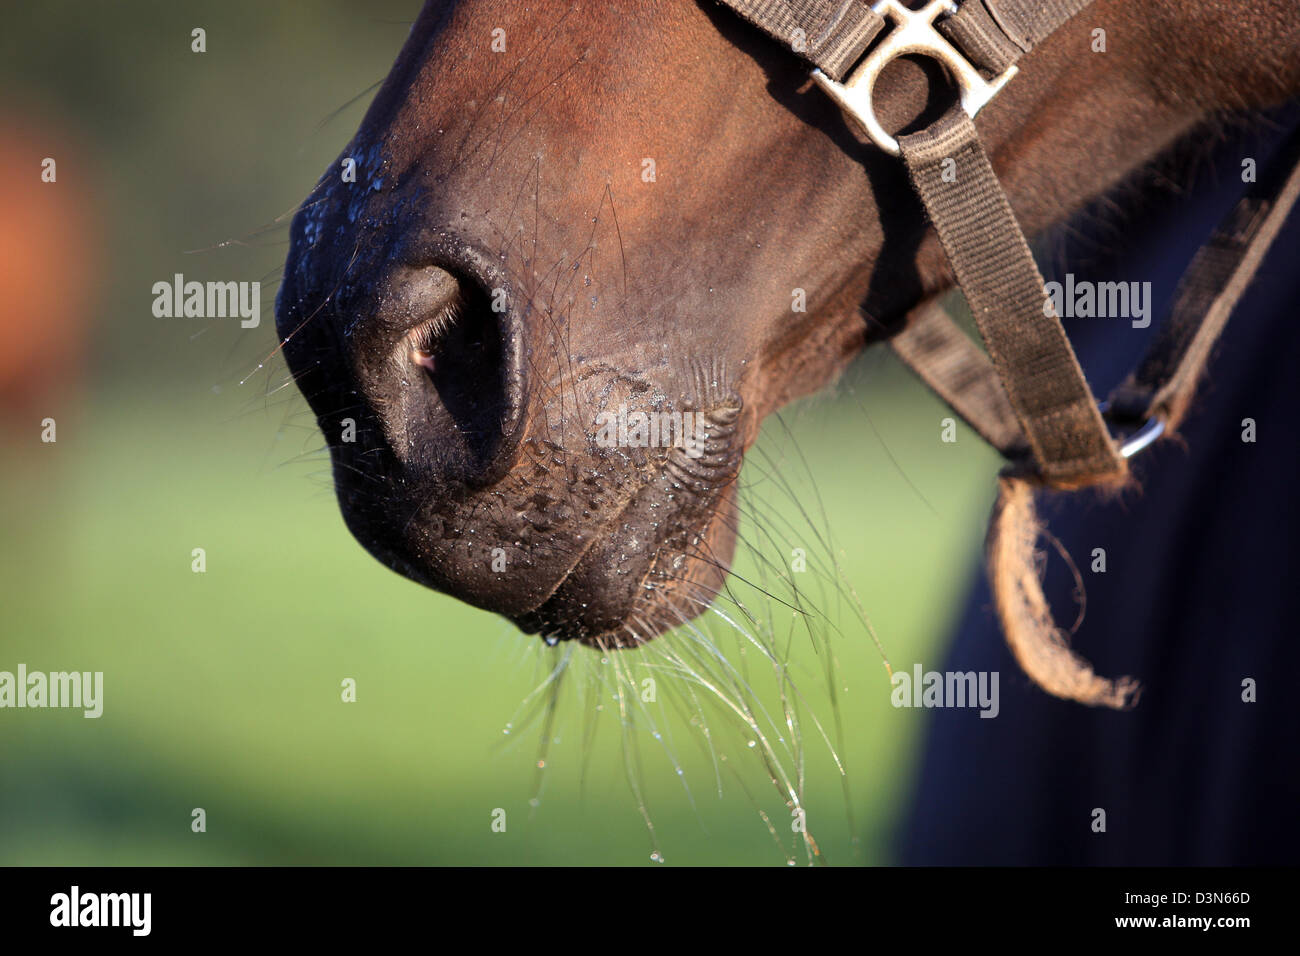 Görlsdorf, Germany, Detail, mouth and nostrils of a horse Stock Photo